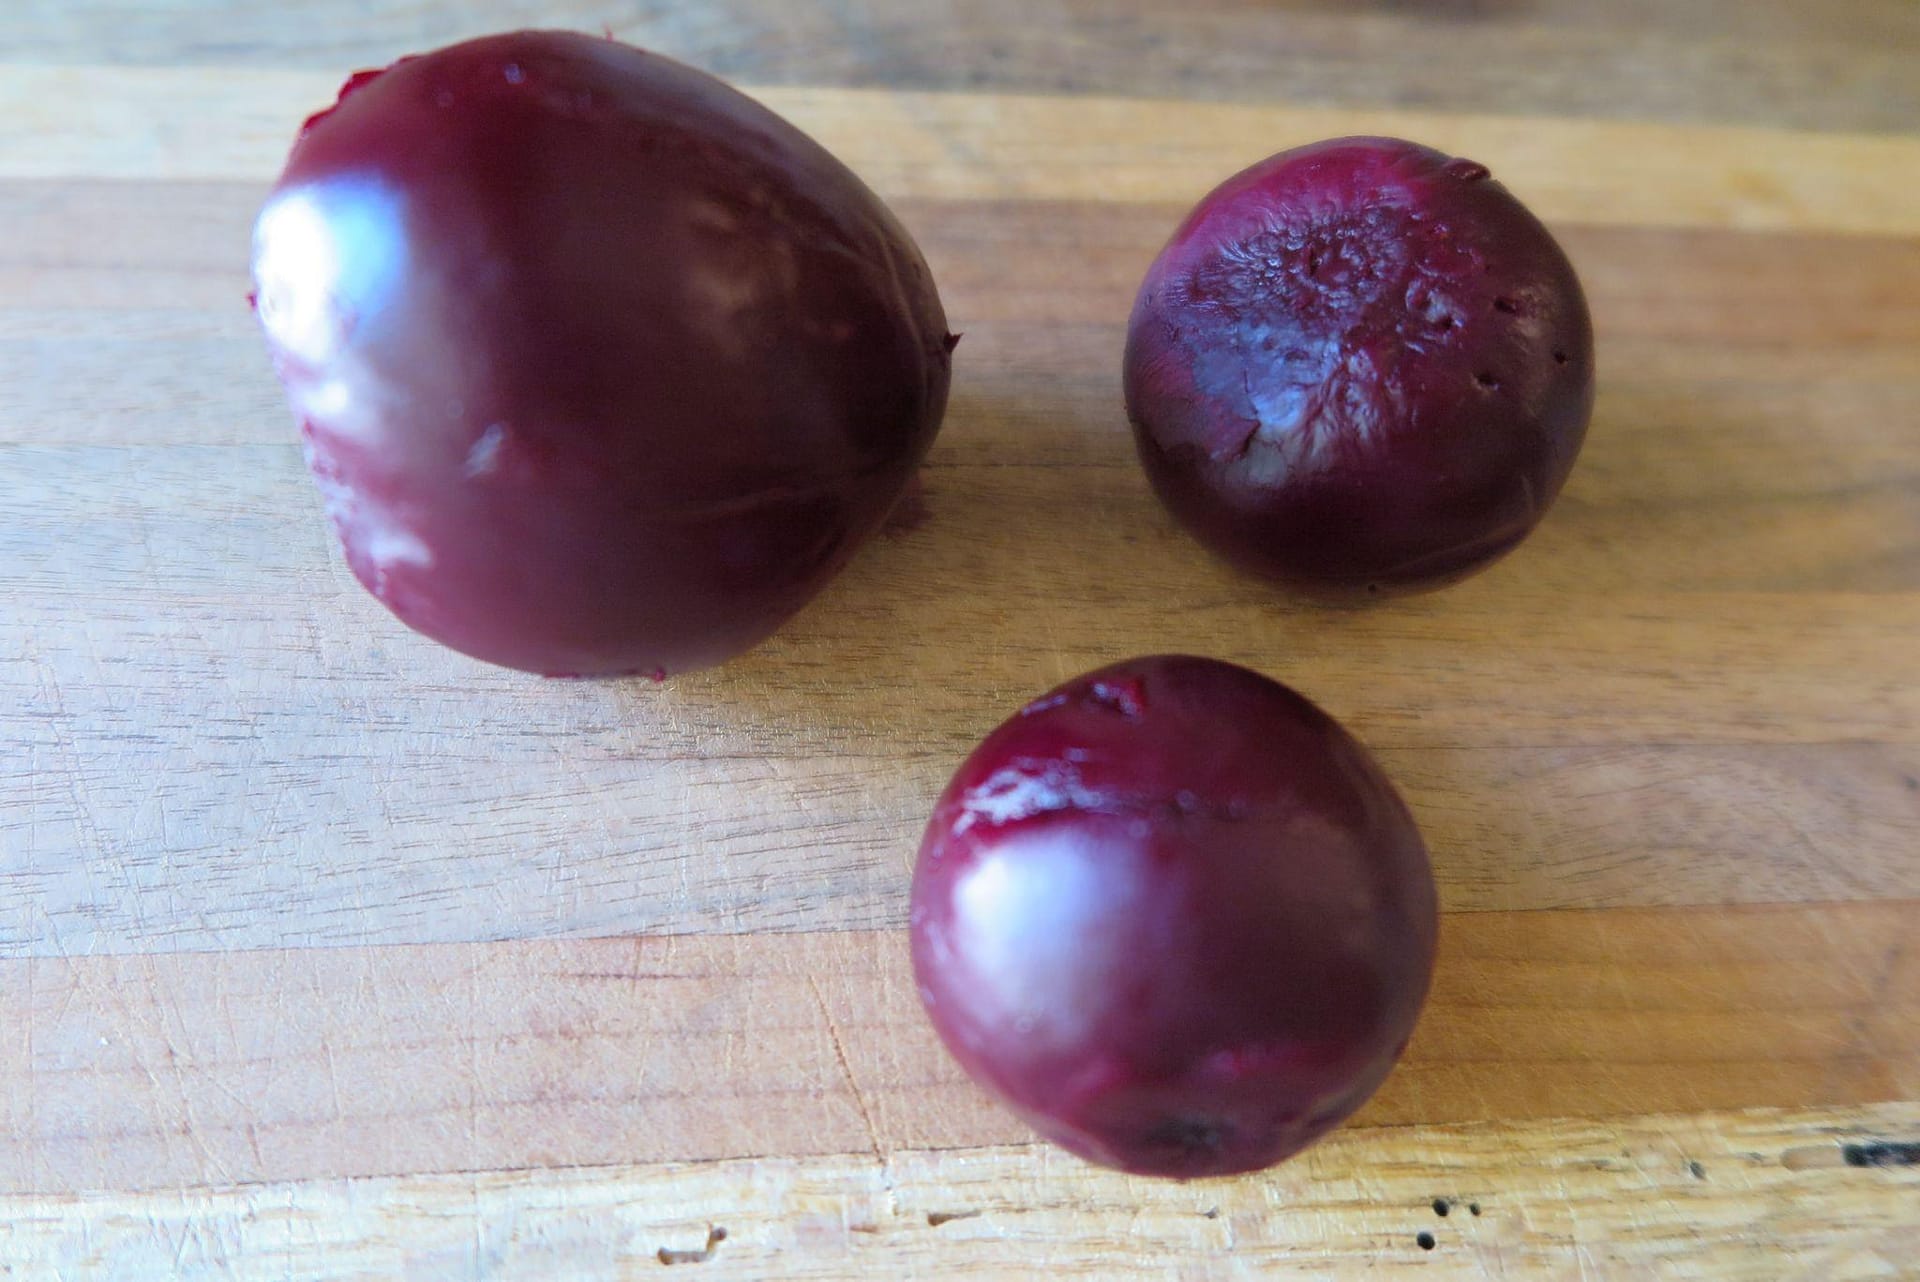 Three beets, cooked and cleaned, on a wood background